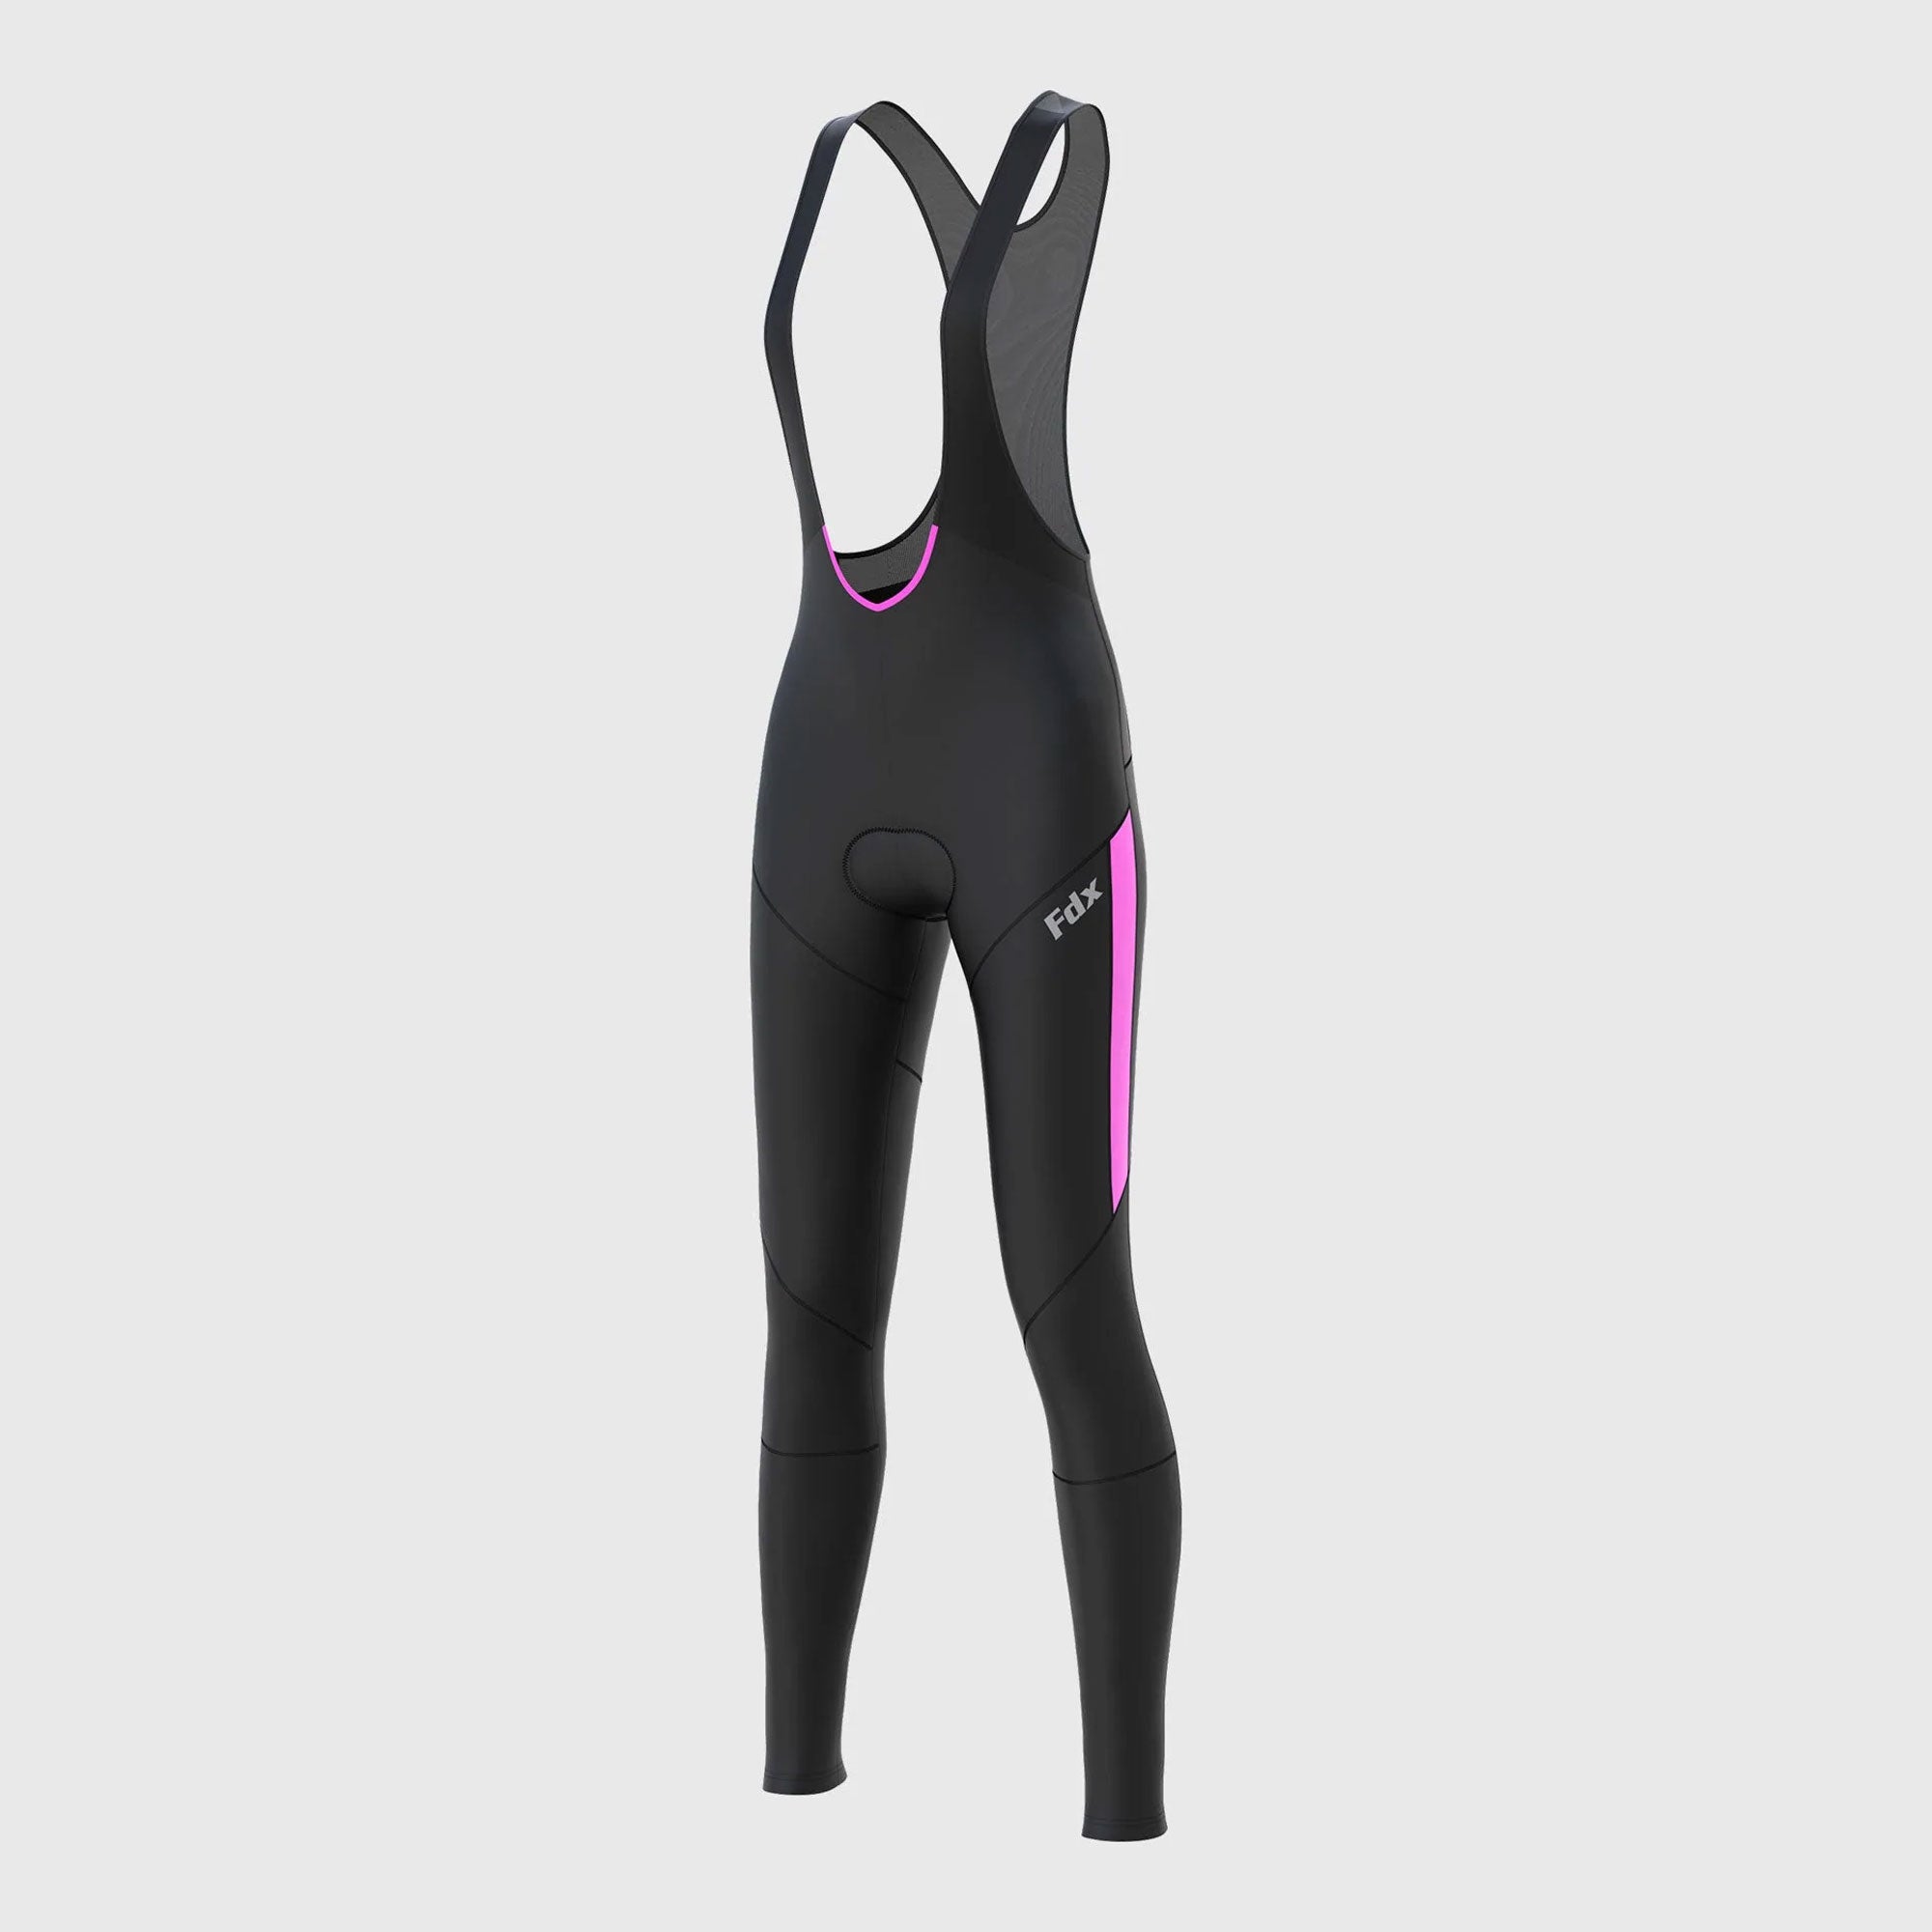 Women winter cycling tights • • • • G4 Dimension